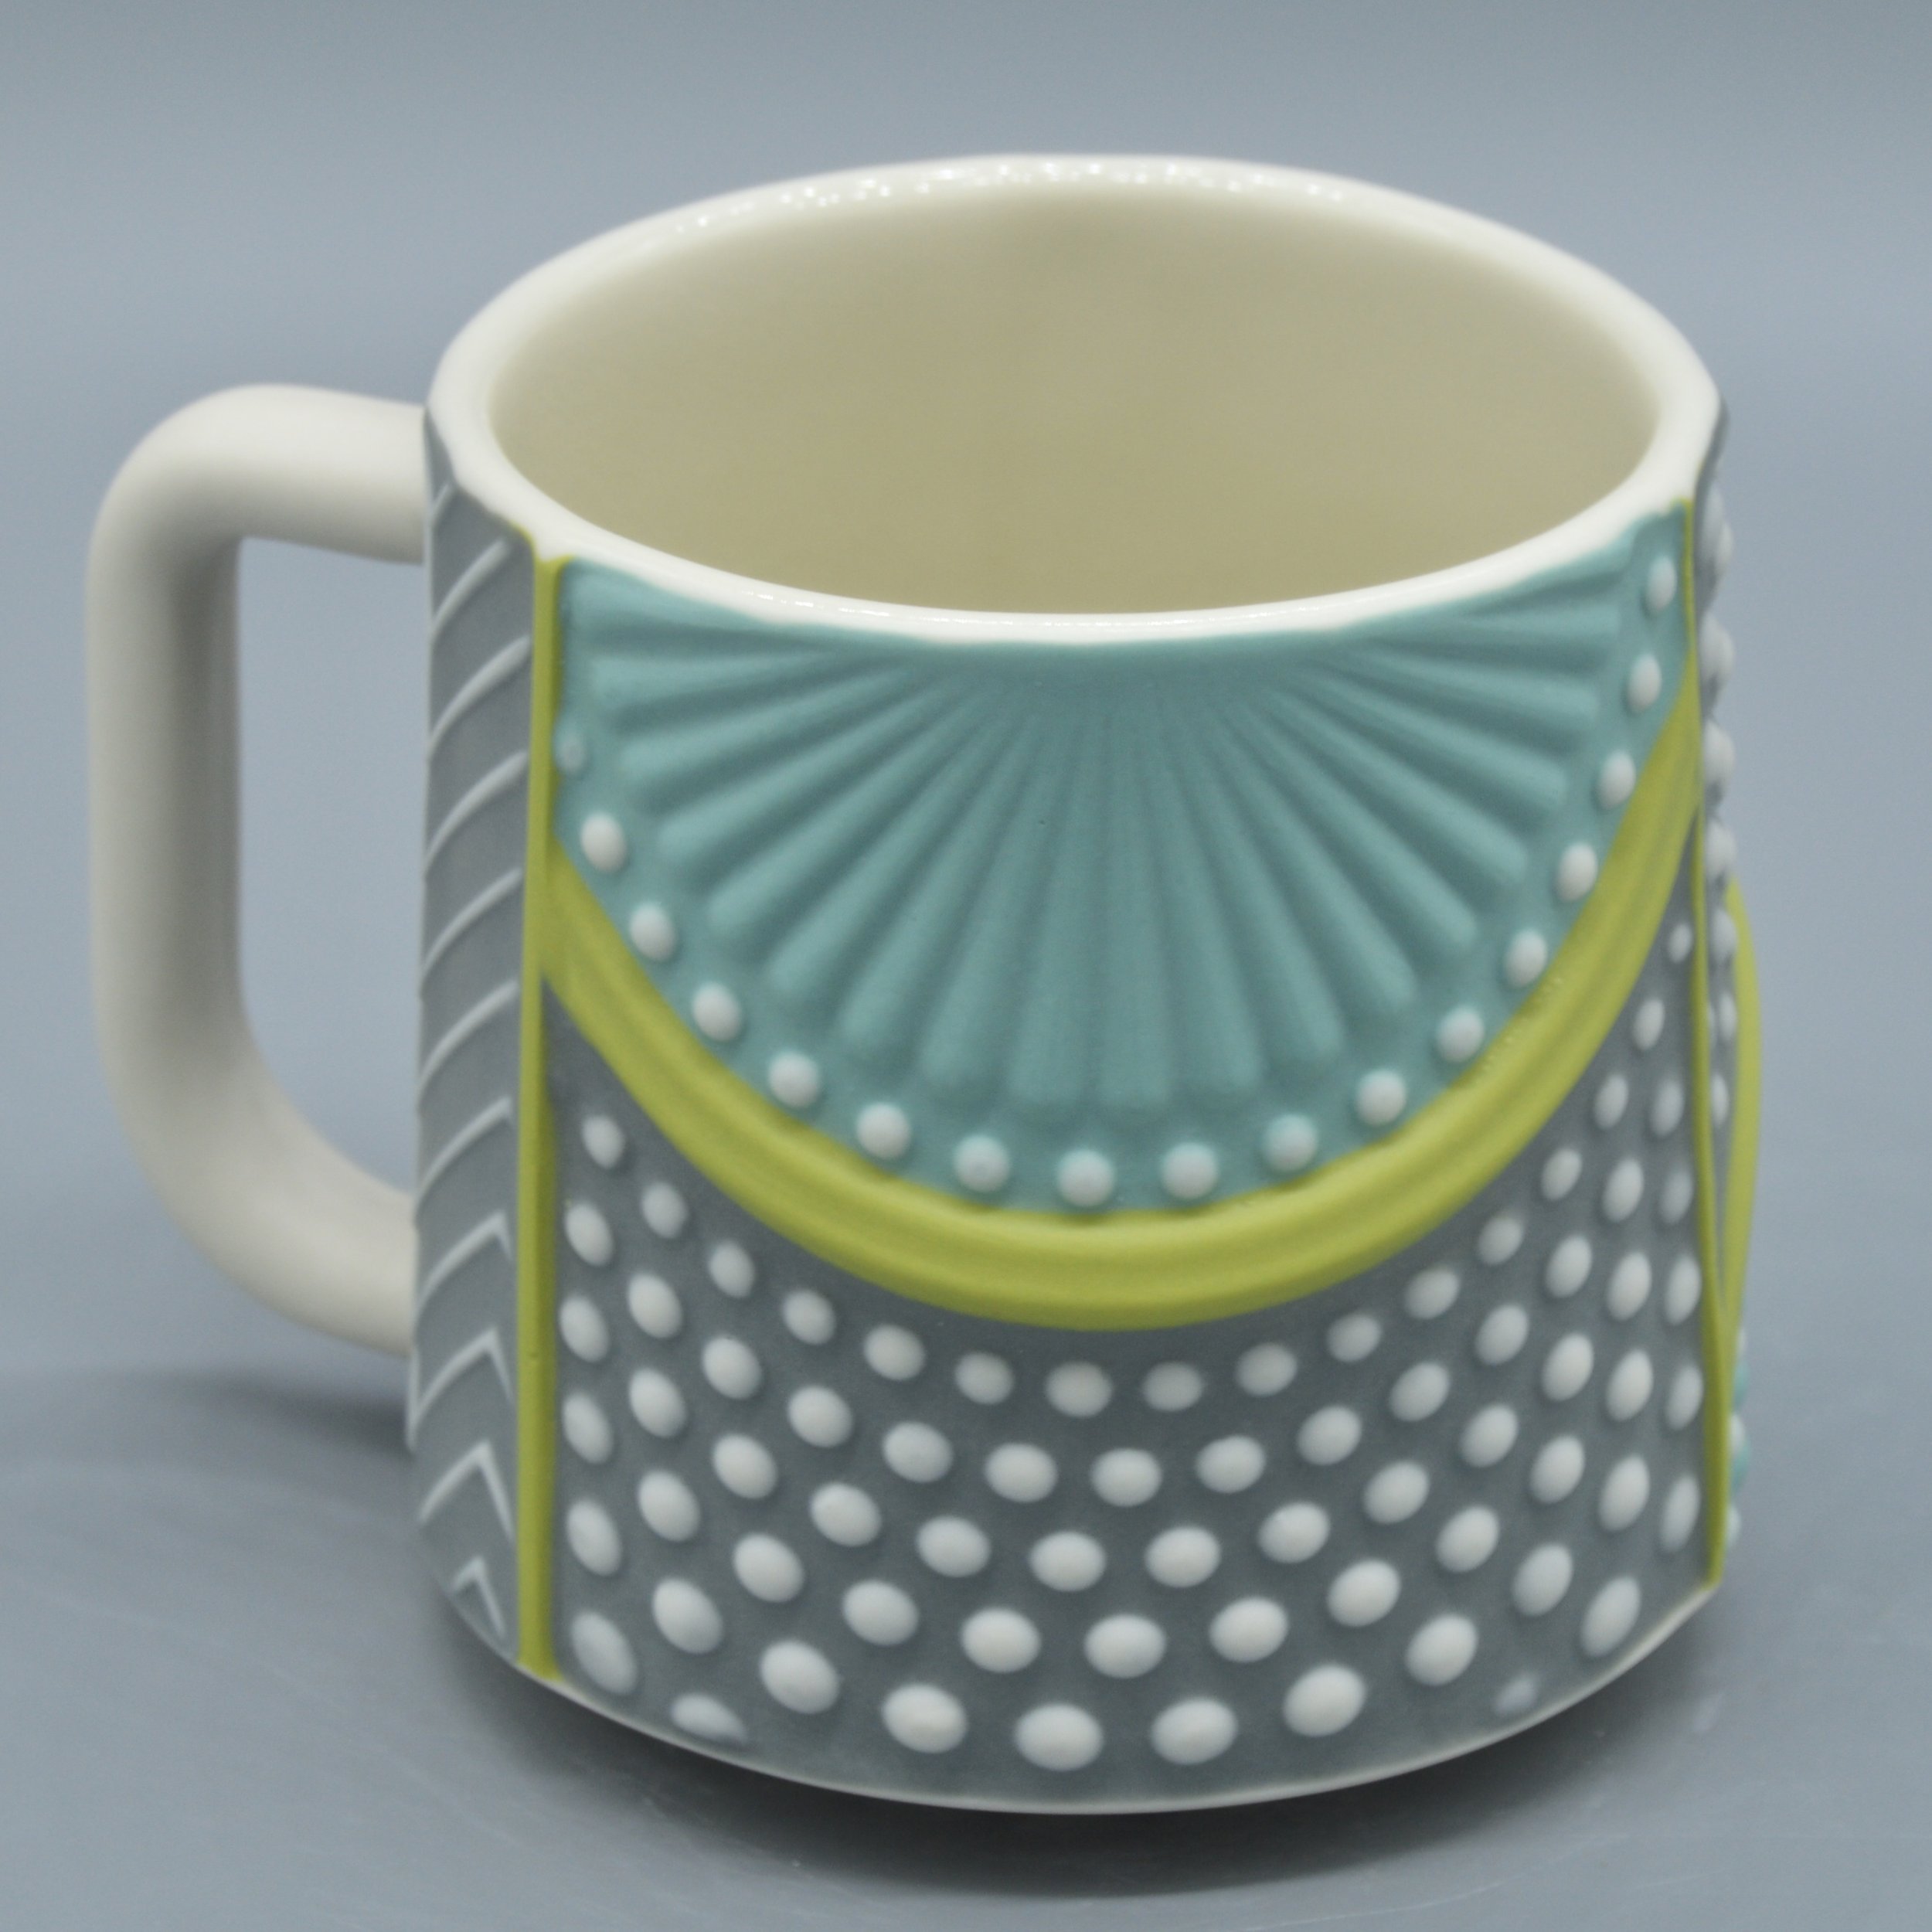 Half Pinwheel/Dots in Grey, Turquoise, Chartreuse